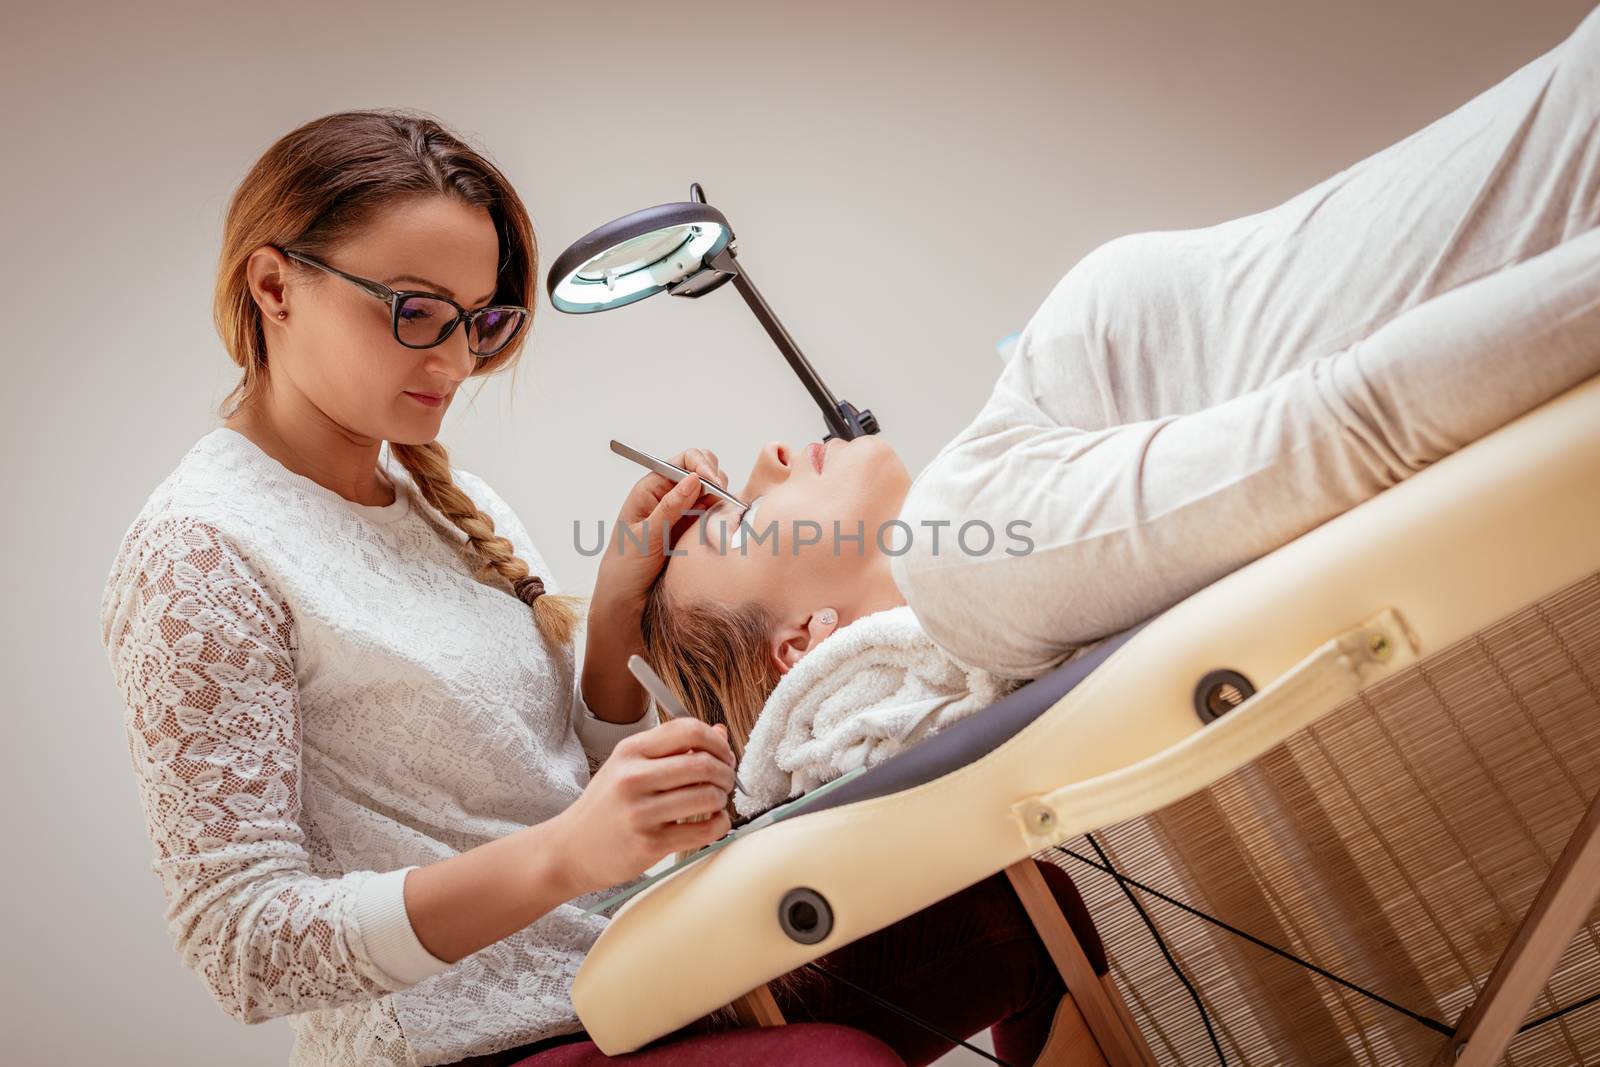 Beautician applying extended eyelashes to model at the beauty salon.